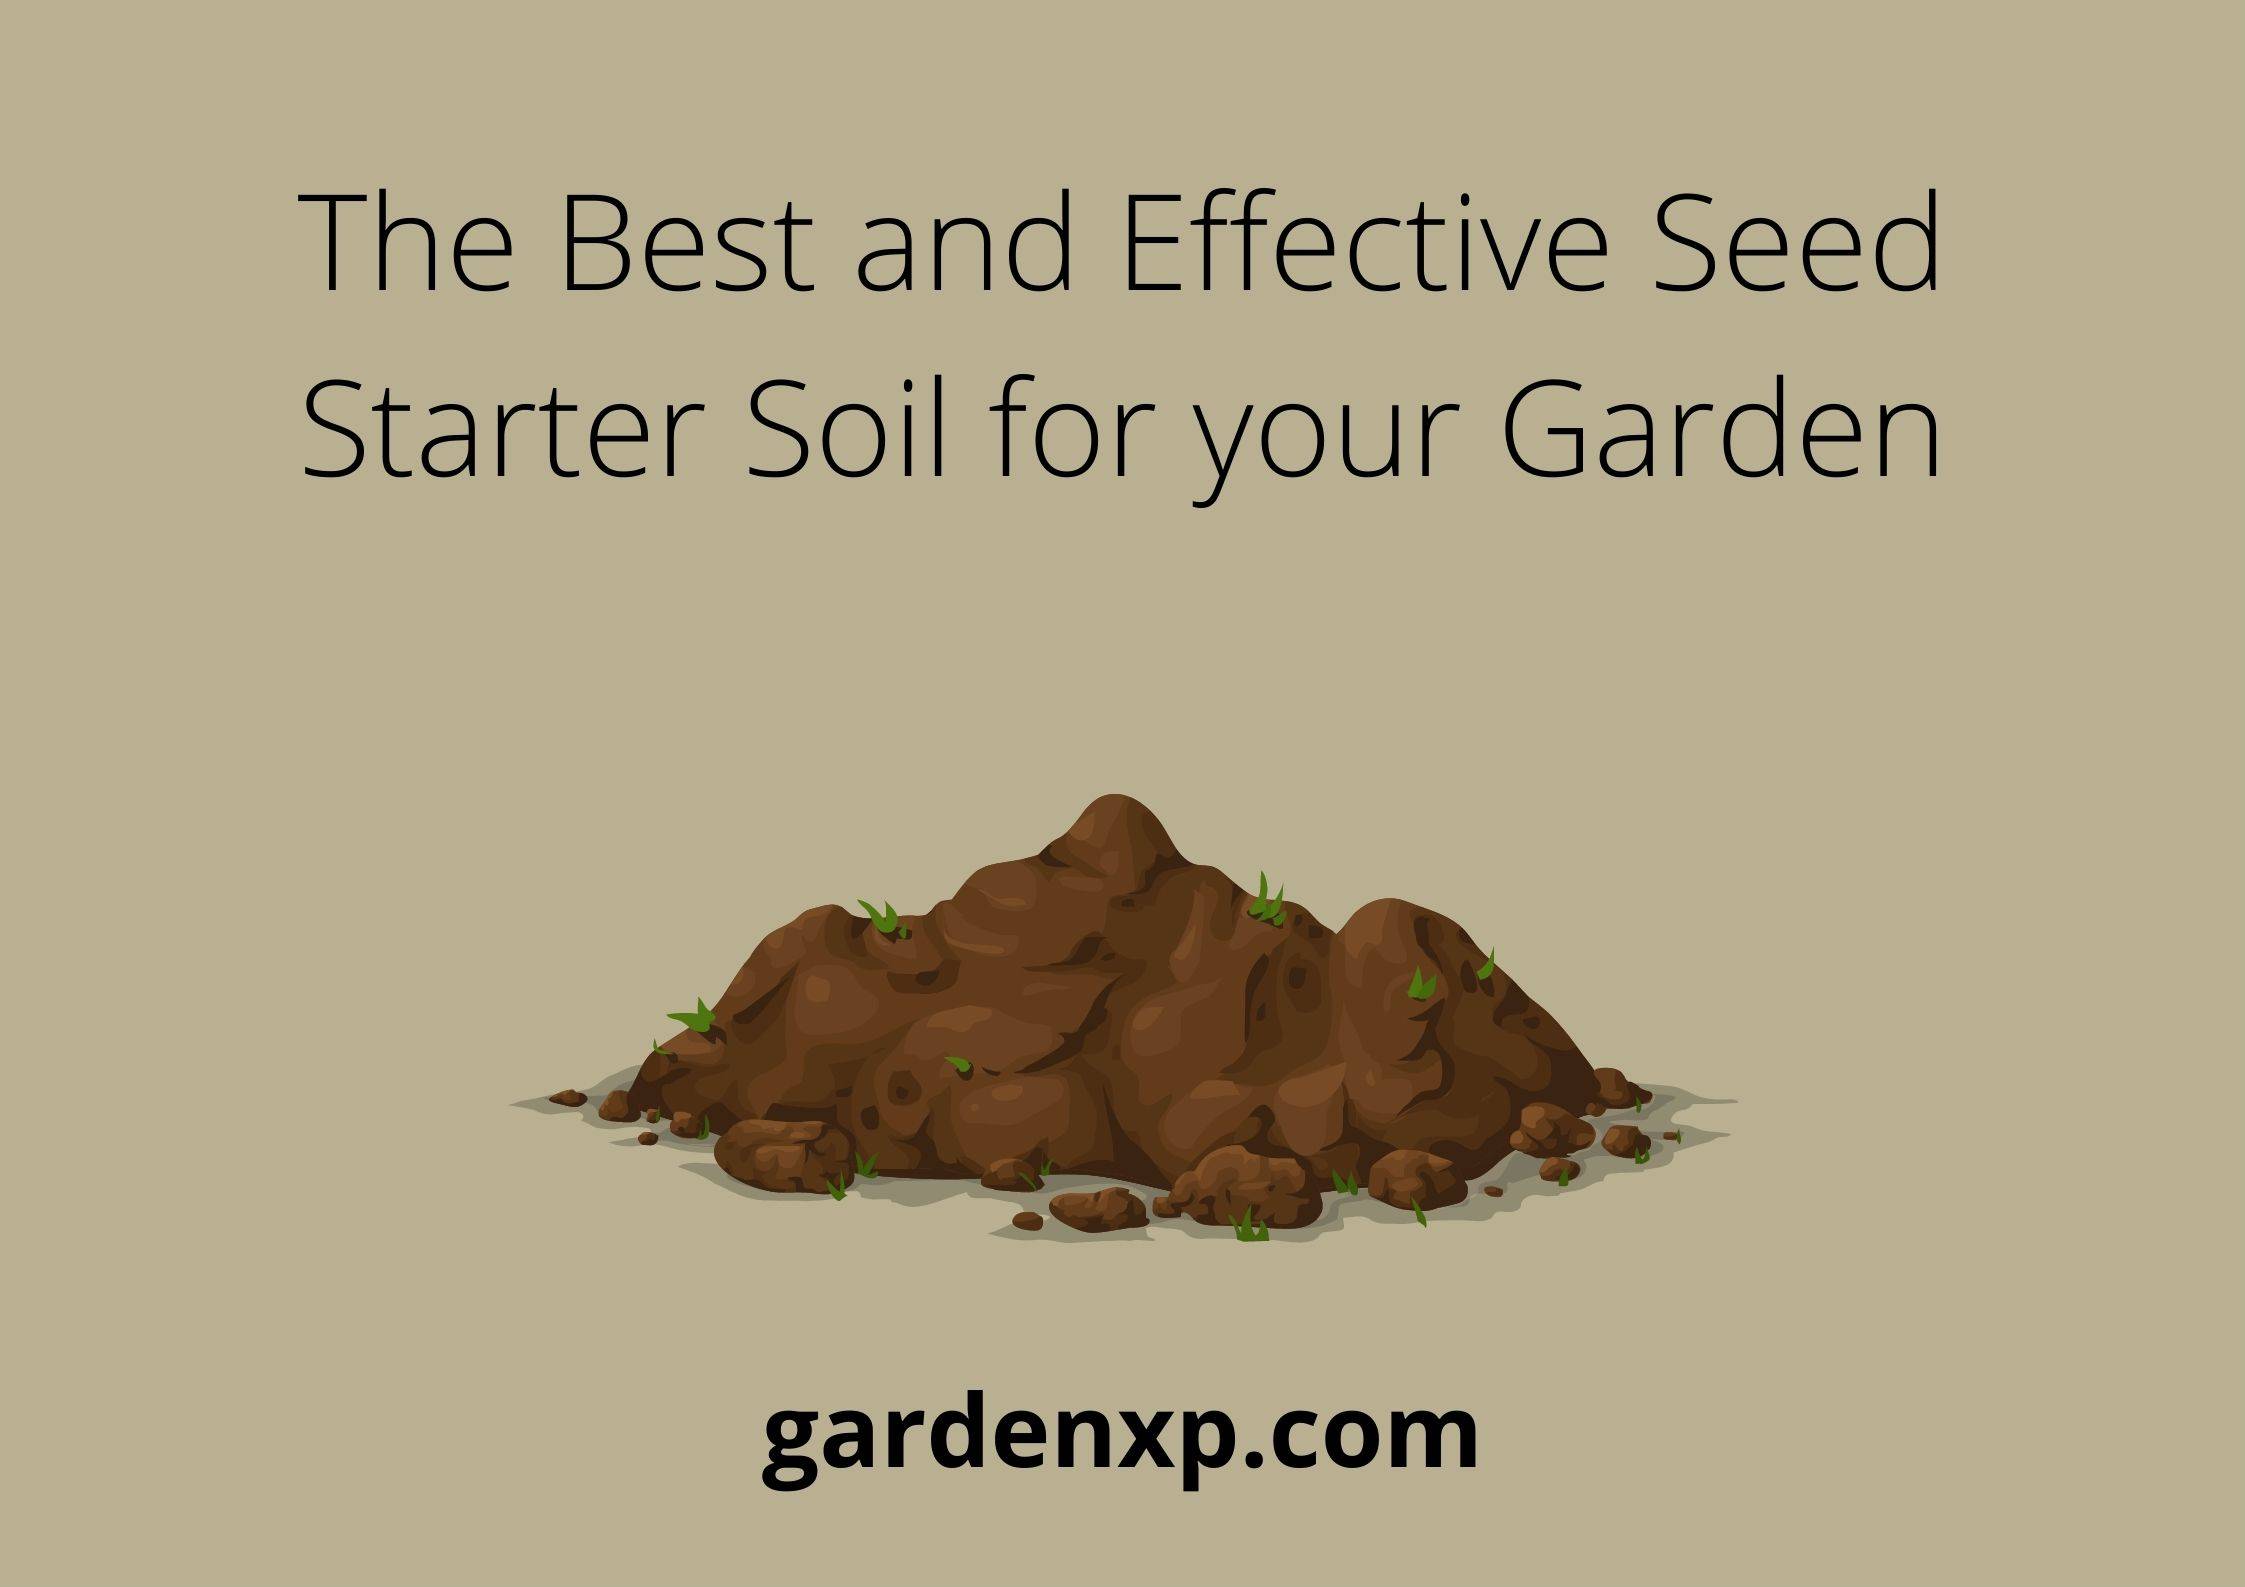 The Best and Effective Seed Starter Soil for your Garden